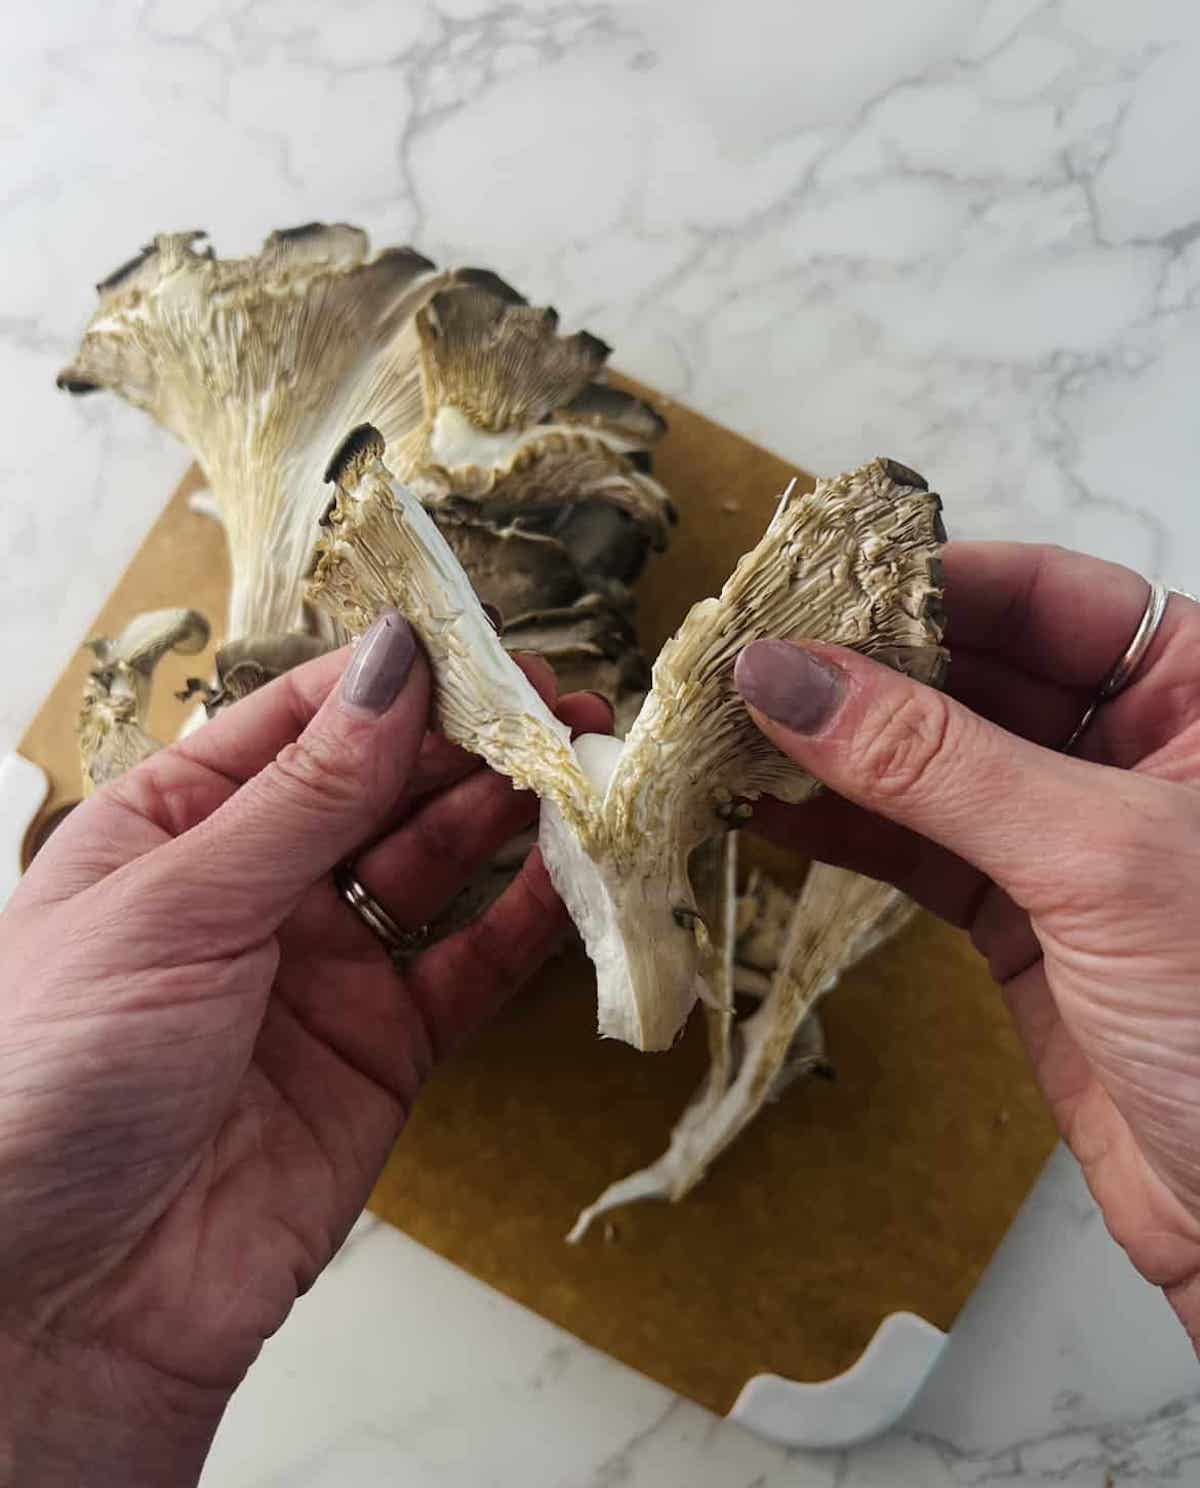 This is a photo of an oyster mushroom being peeled.